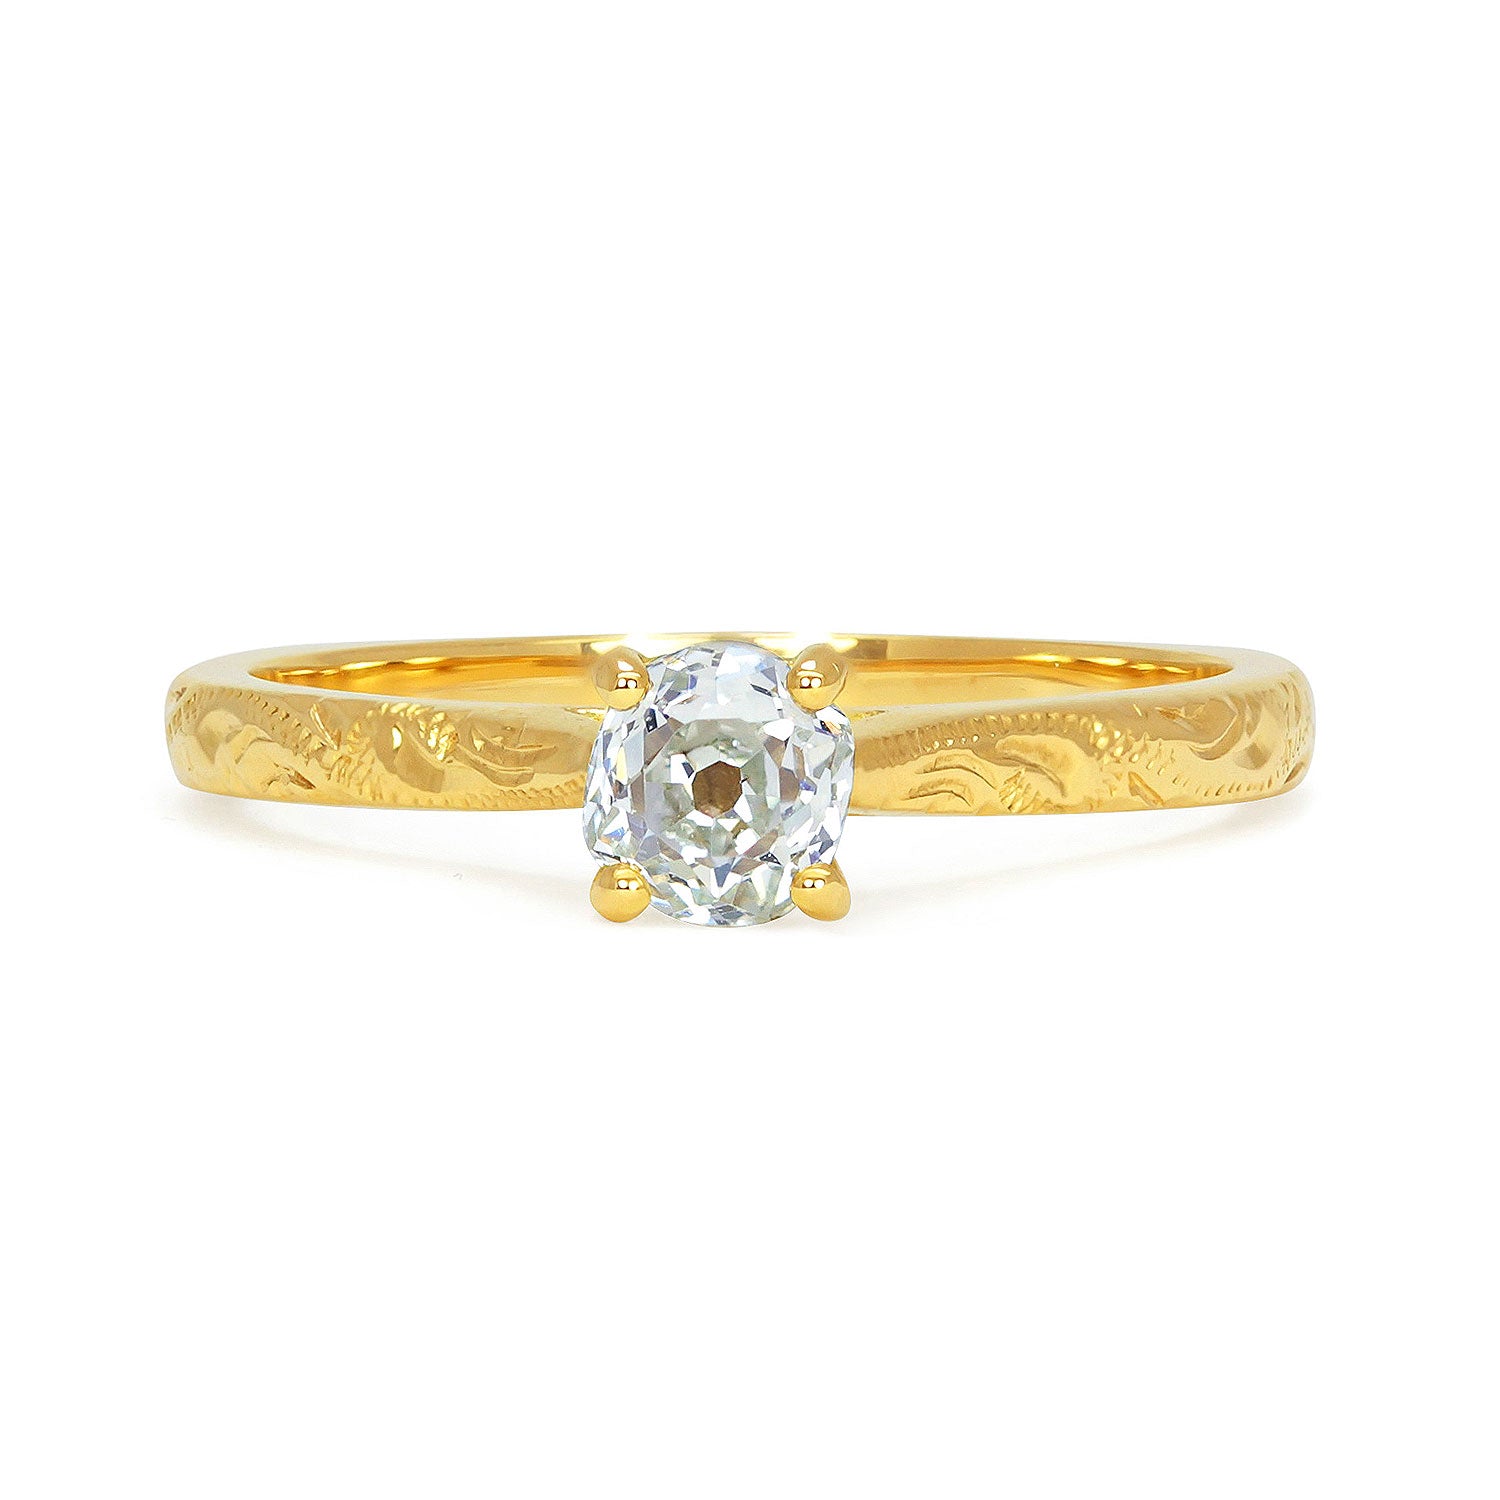 Fancy Athena engagement ring in 18ct yellow recycled gold, set with a 0.4ct sustainable recycled old cushion cut diamond and hand engraved with Art Nouveau scrolls